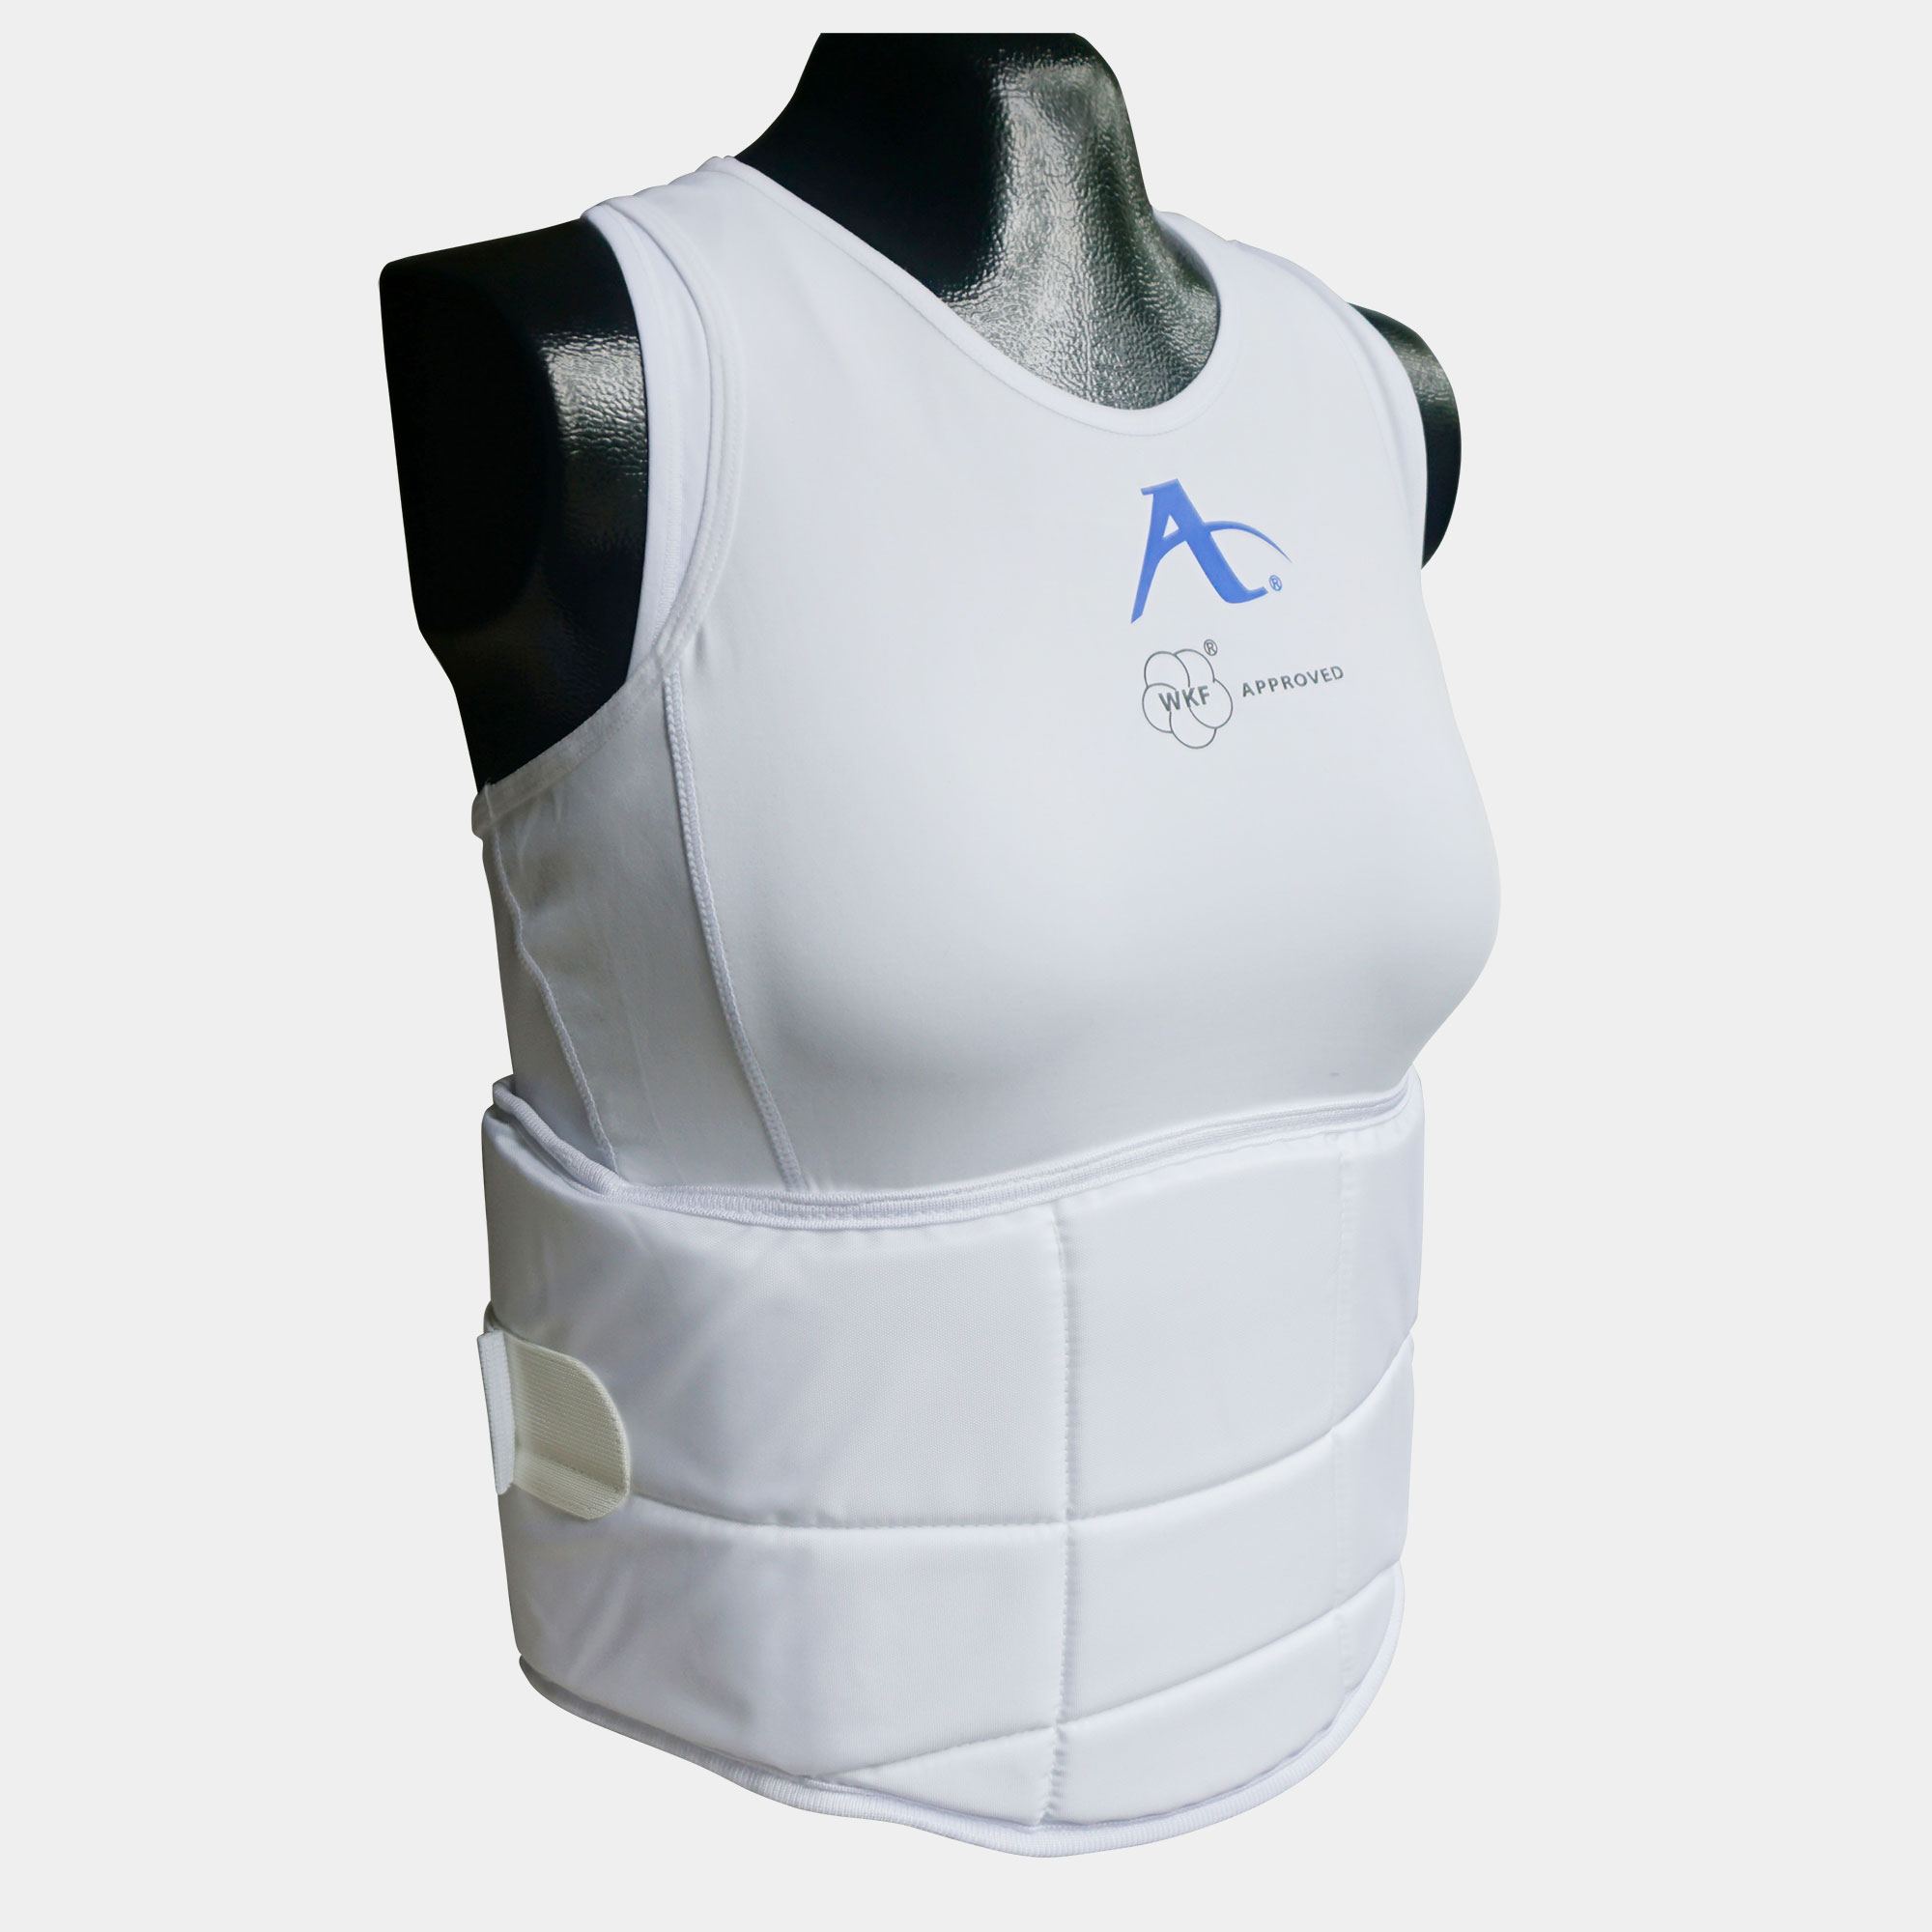 New Tokaido WKF Approved Karate Body Protector Chest Guard Karate Sparring Gear 